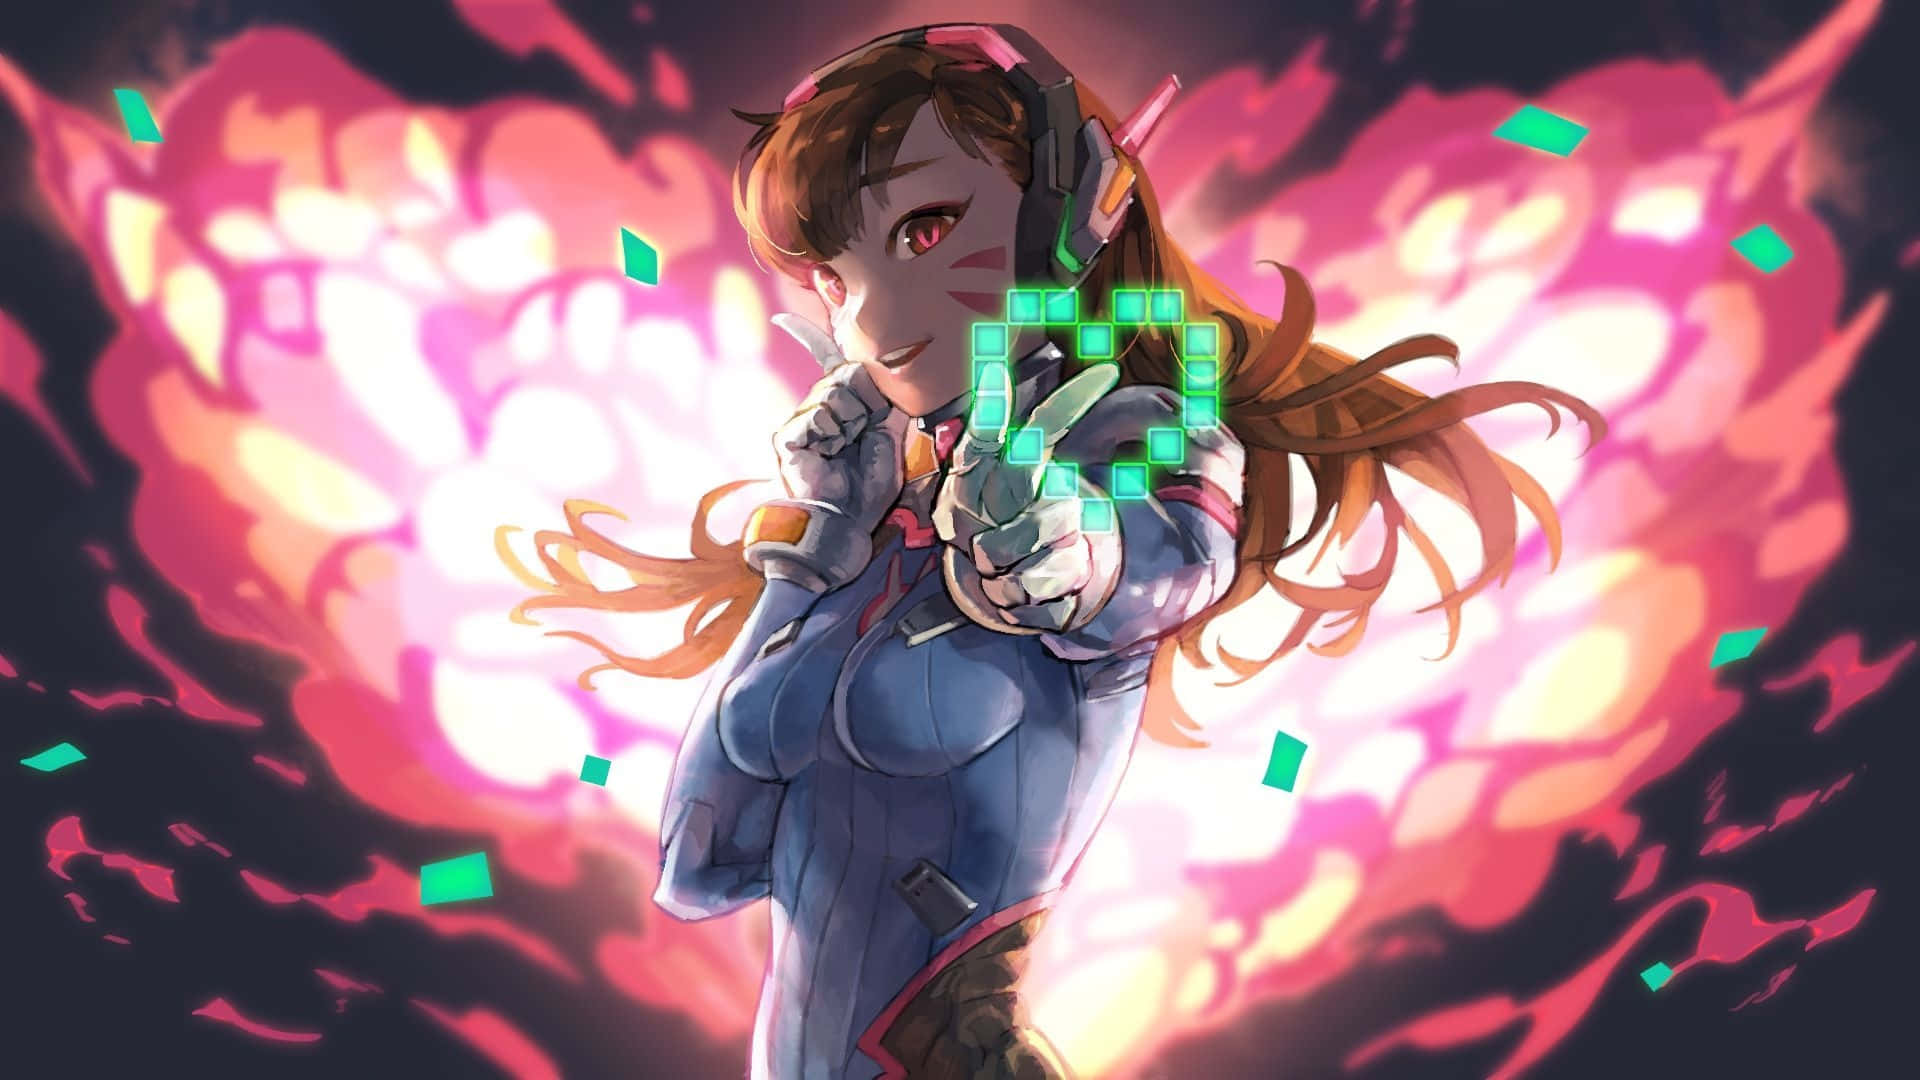 "Take the fight to the next level with Dva from Overwatch!" Wallpaper